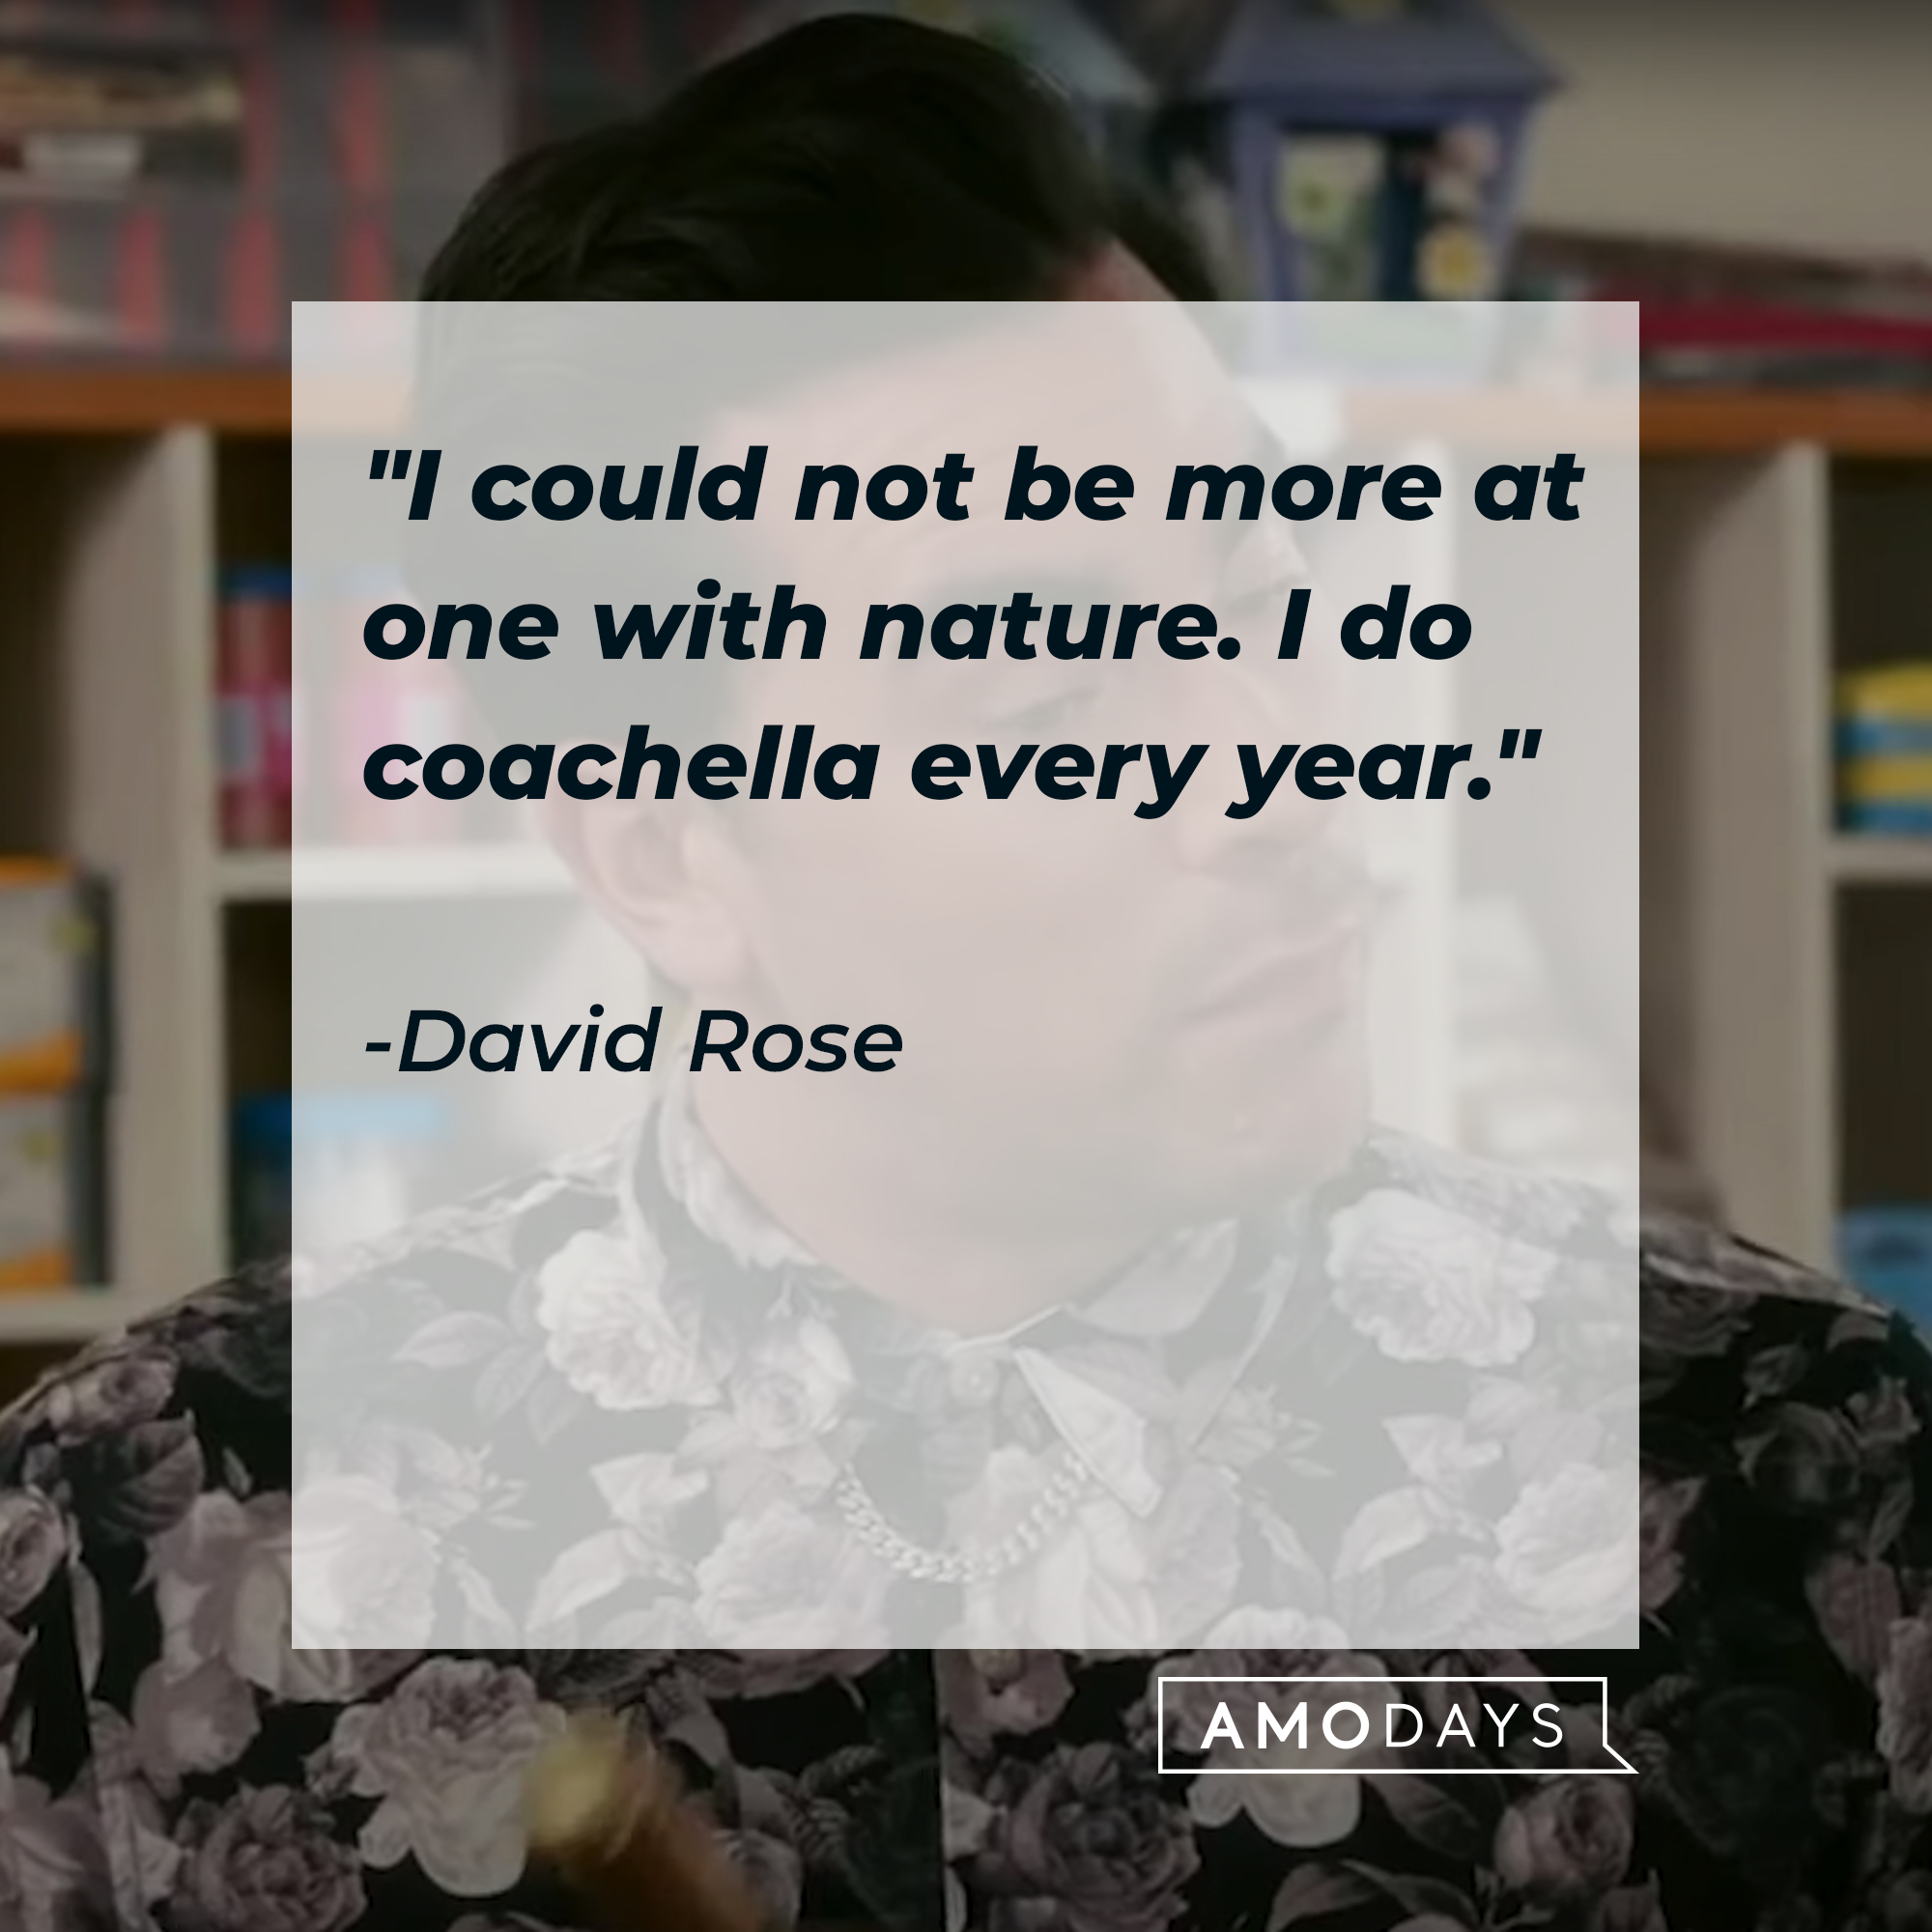 A photo of David Rose with the quote, "I could not be more at one with nature. I do coachella every year." | Source: YouTube/PopTVVideo